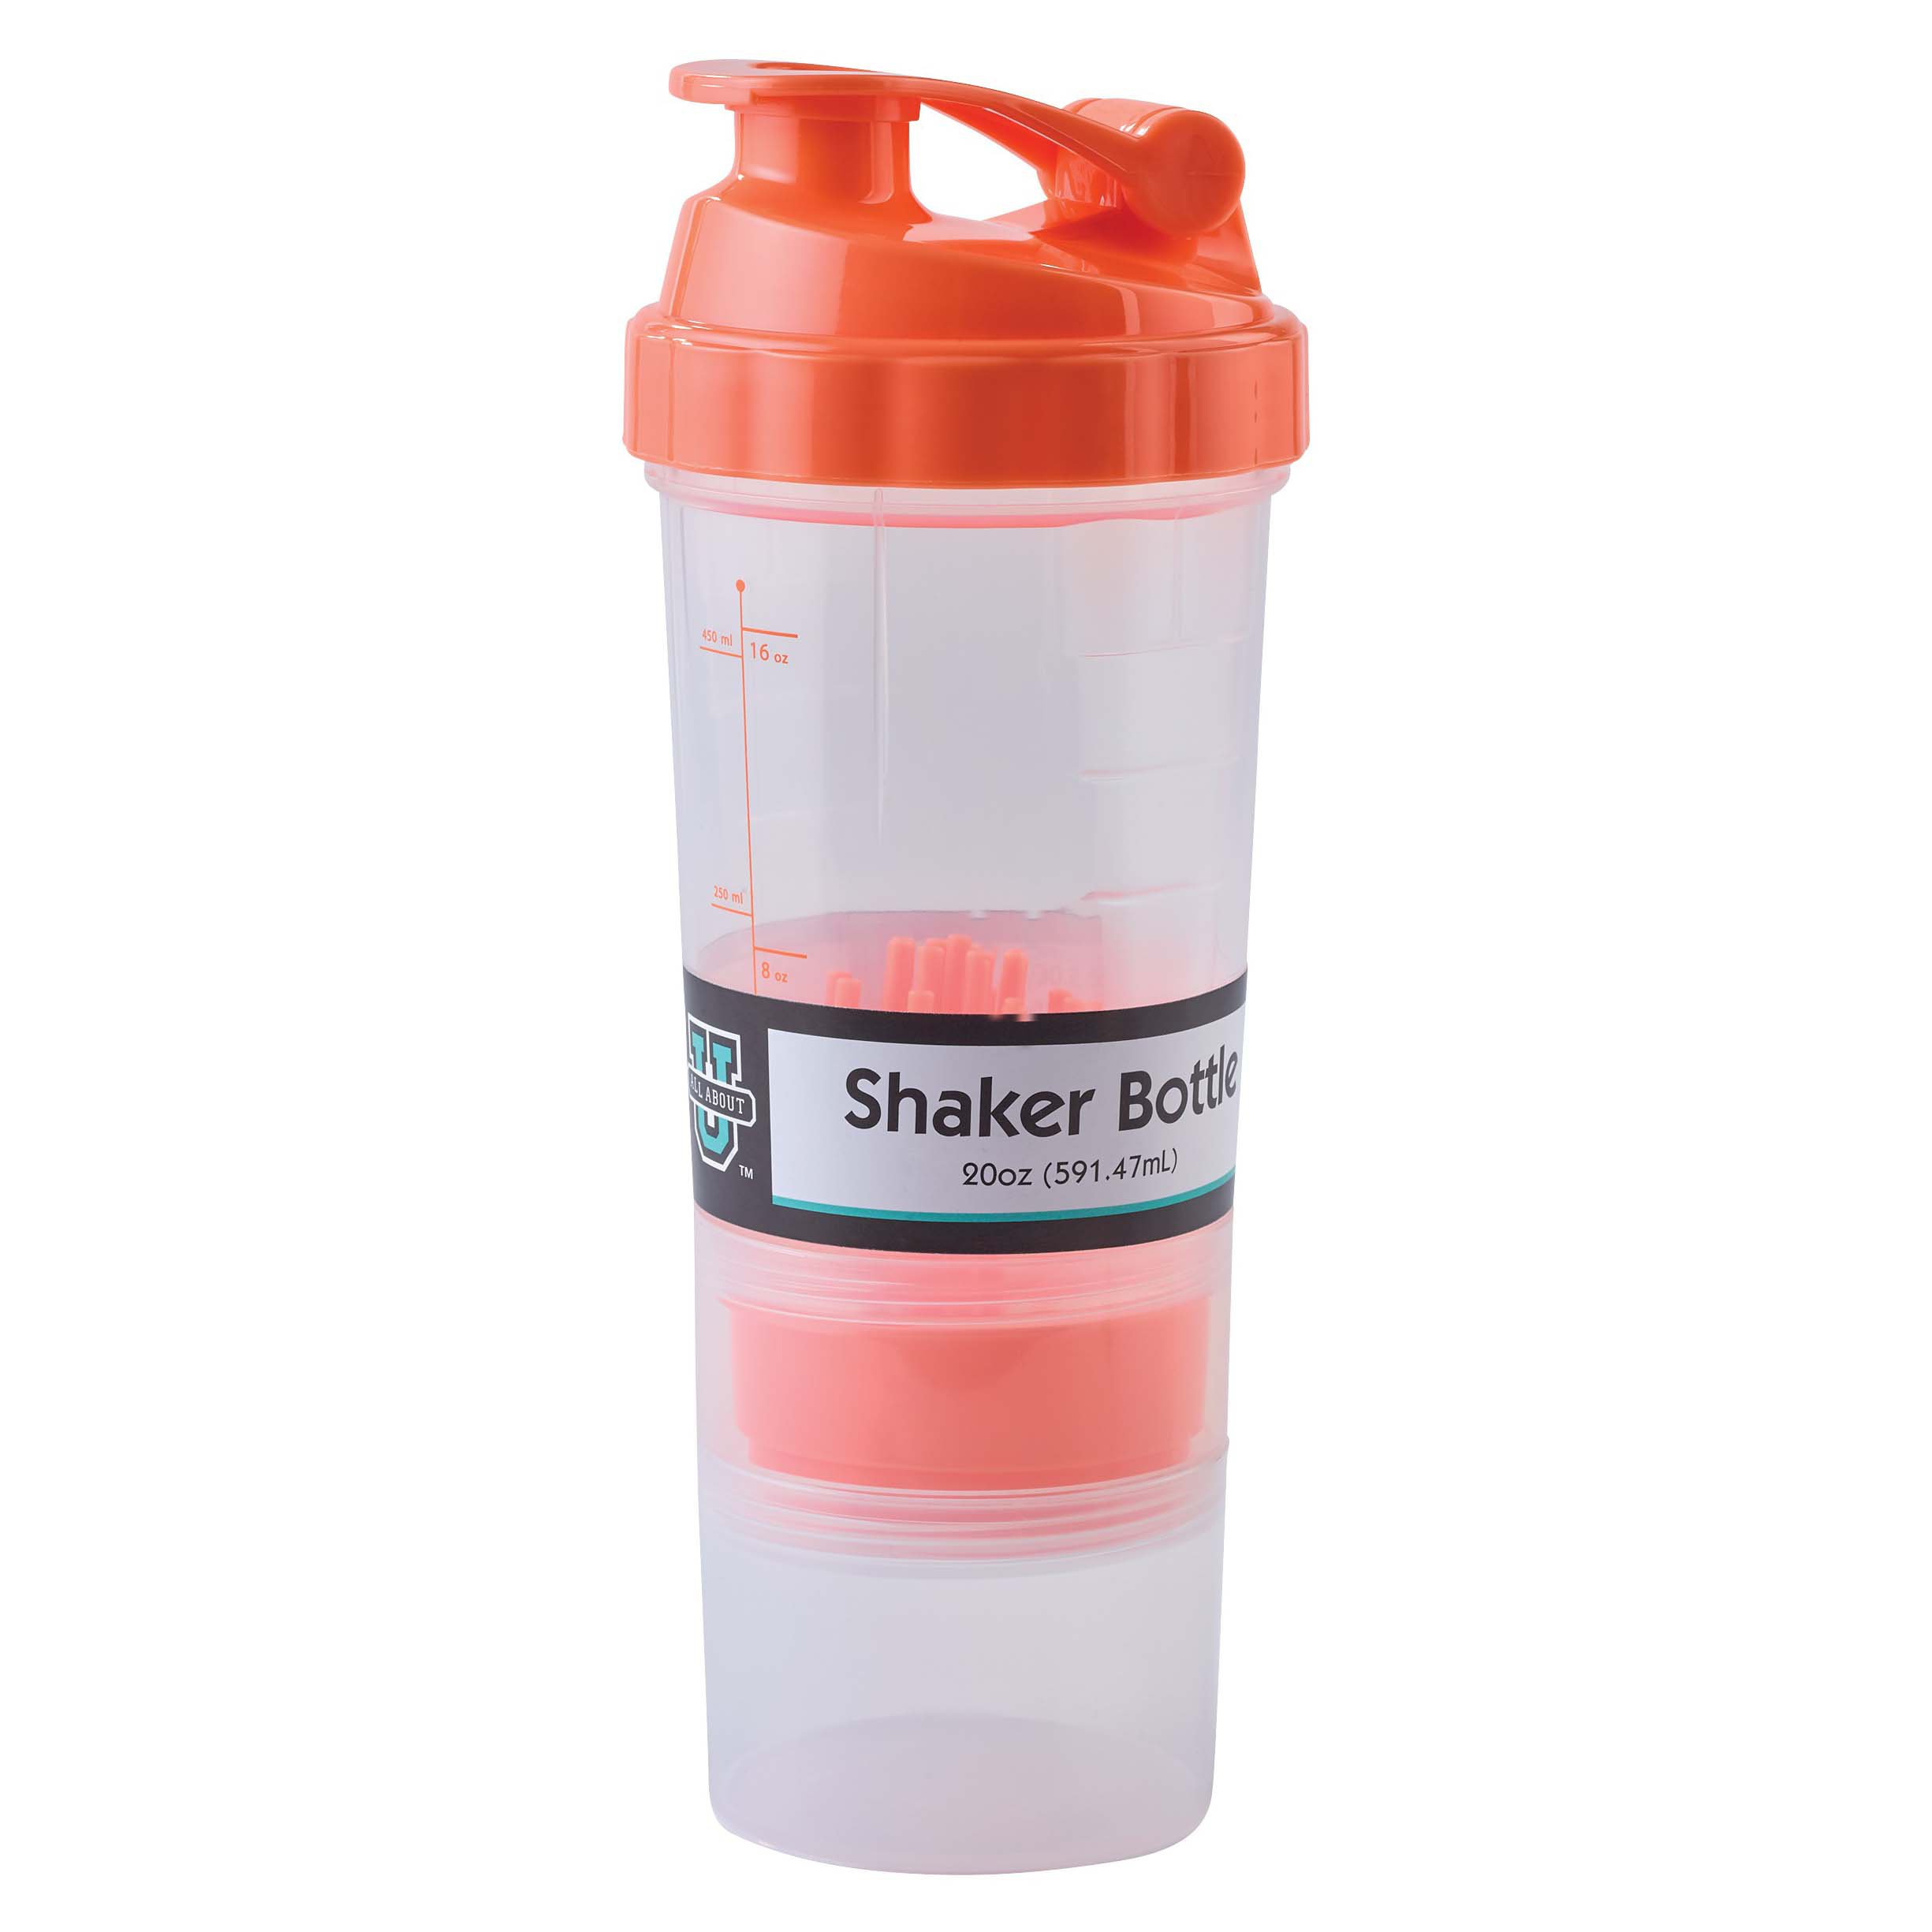 All About U Shaker Bottle With Compartment - Shop Travel & To-Go